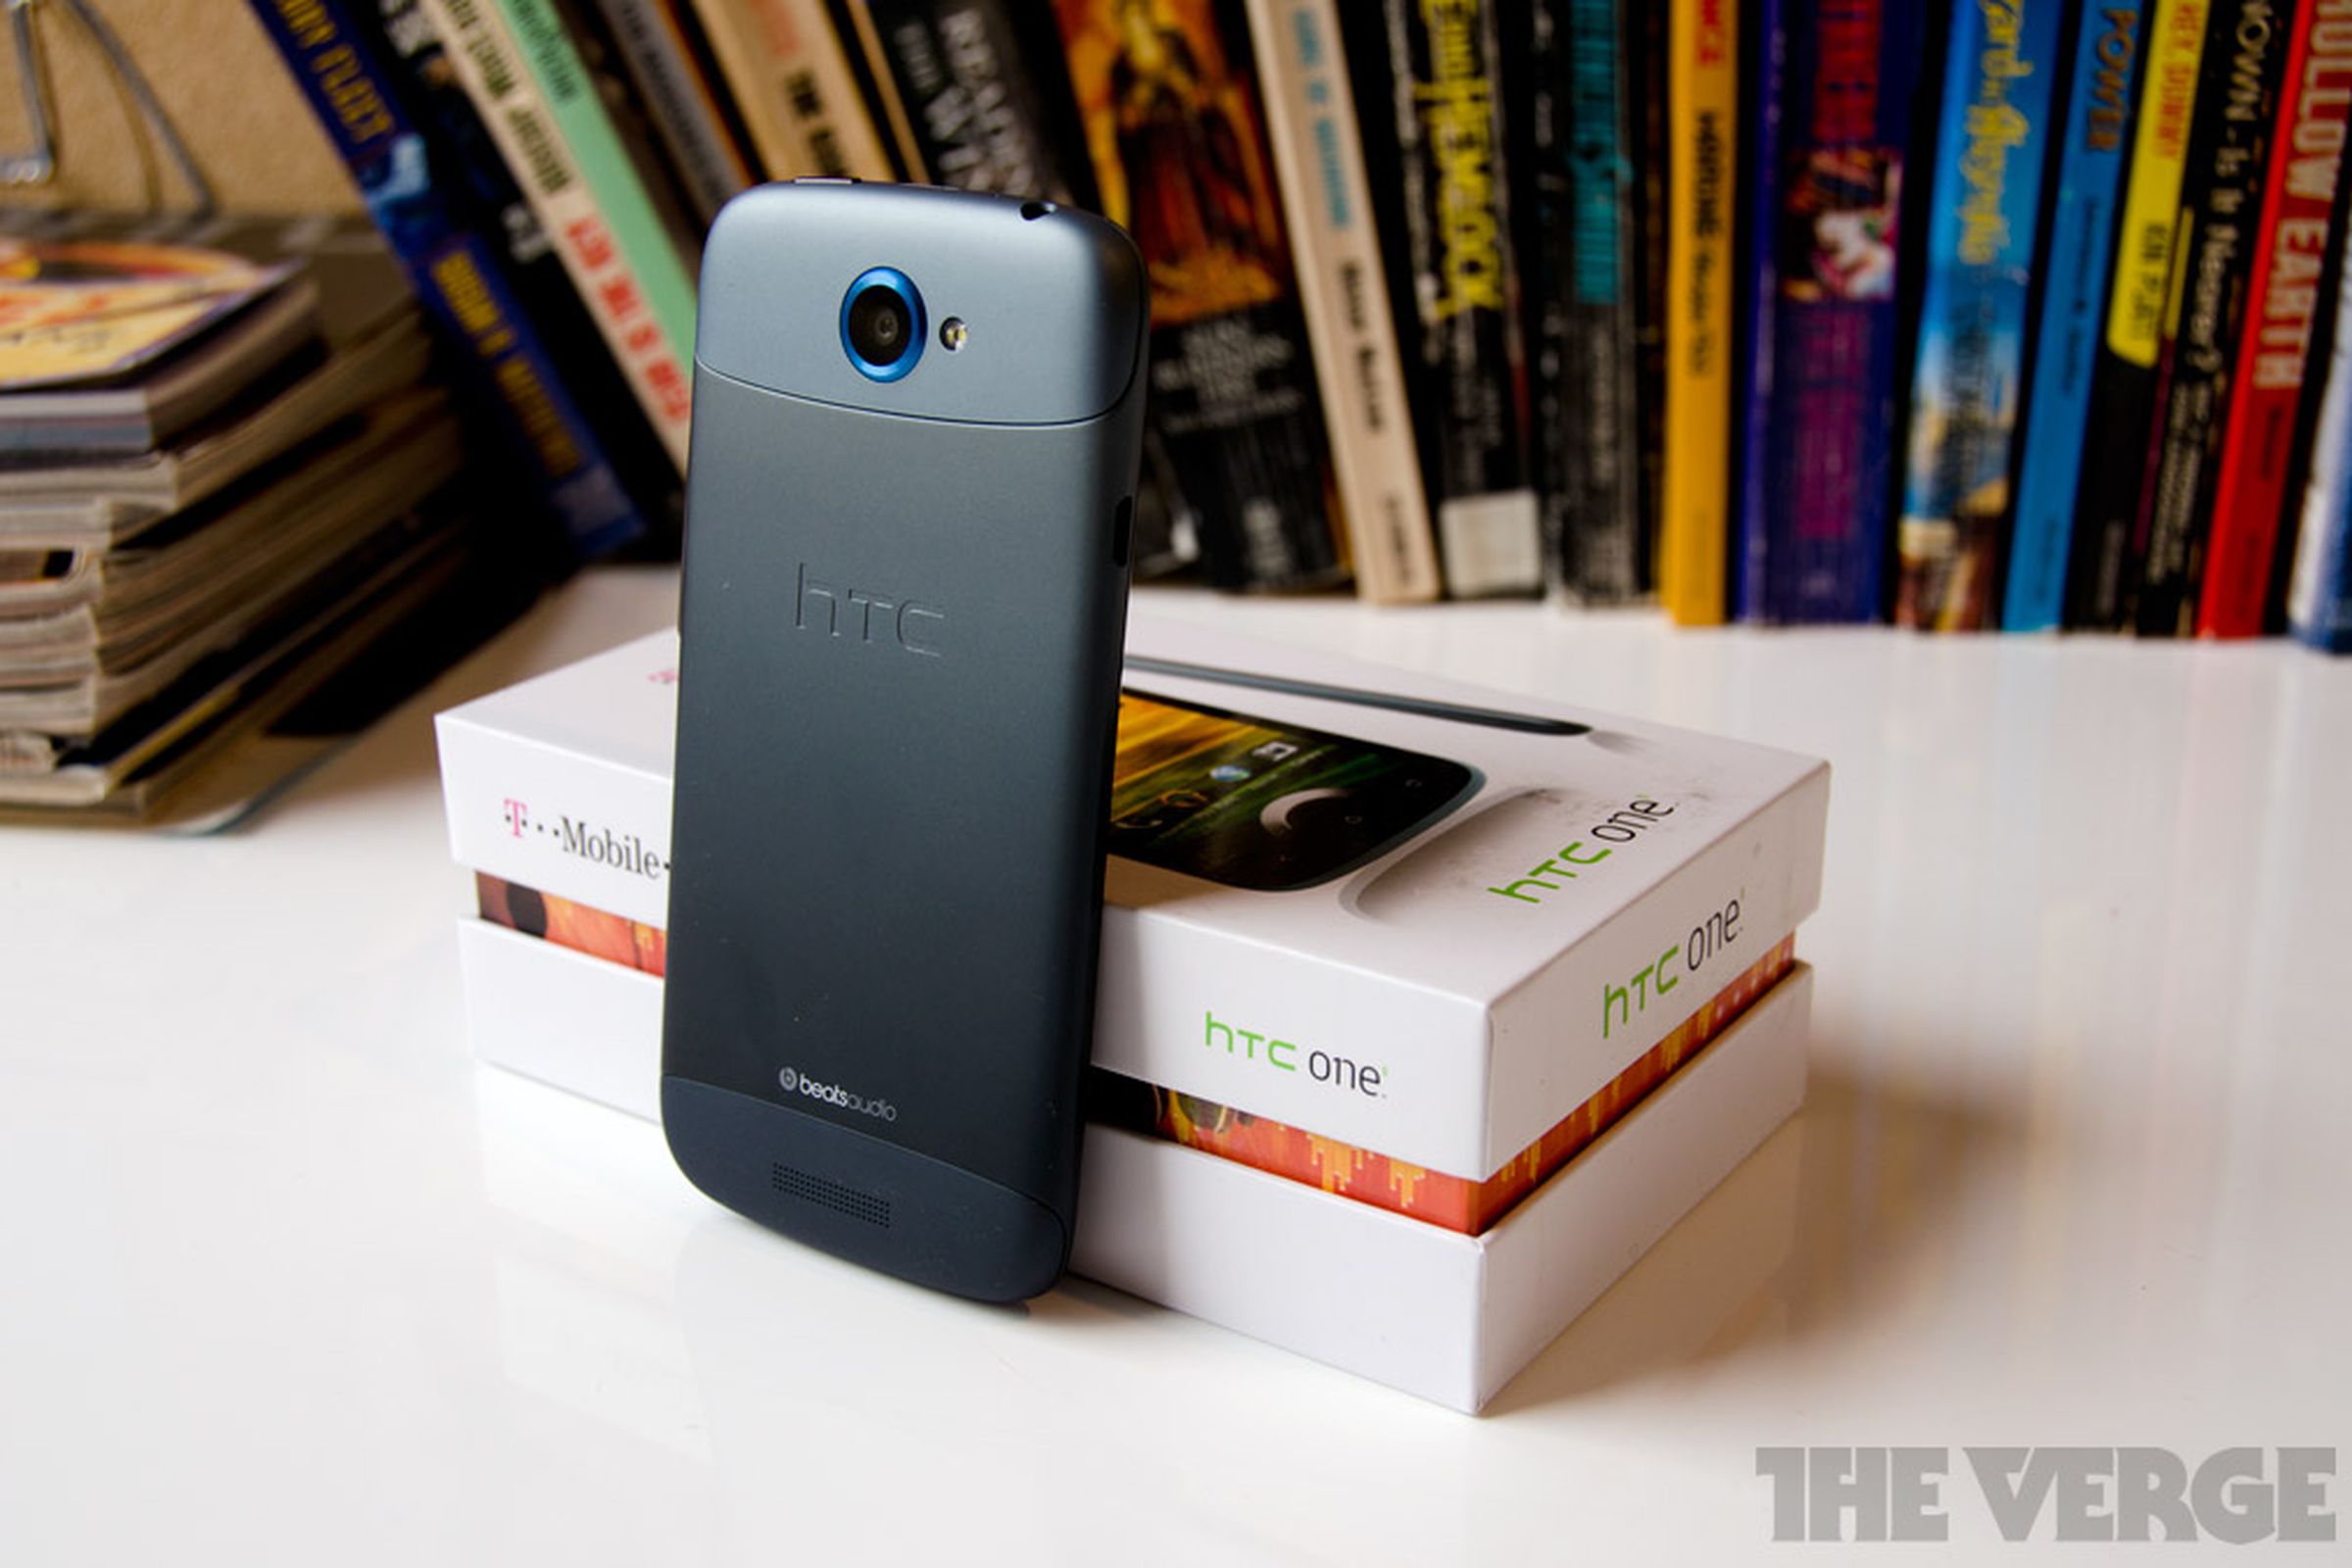 HTC One S for T-Mobile